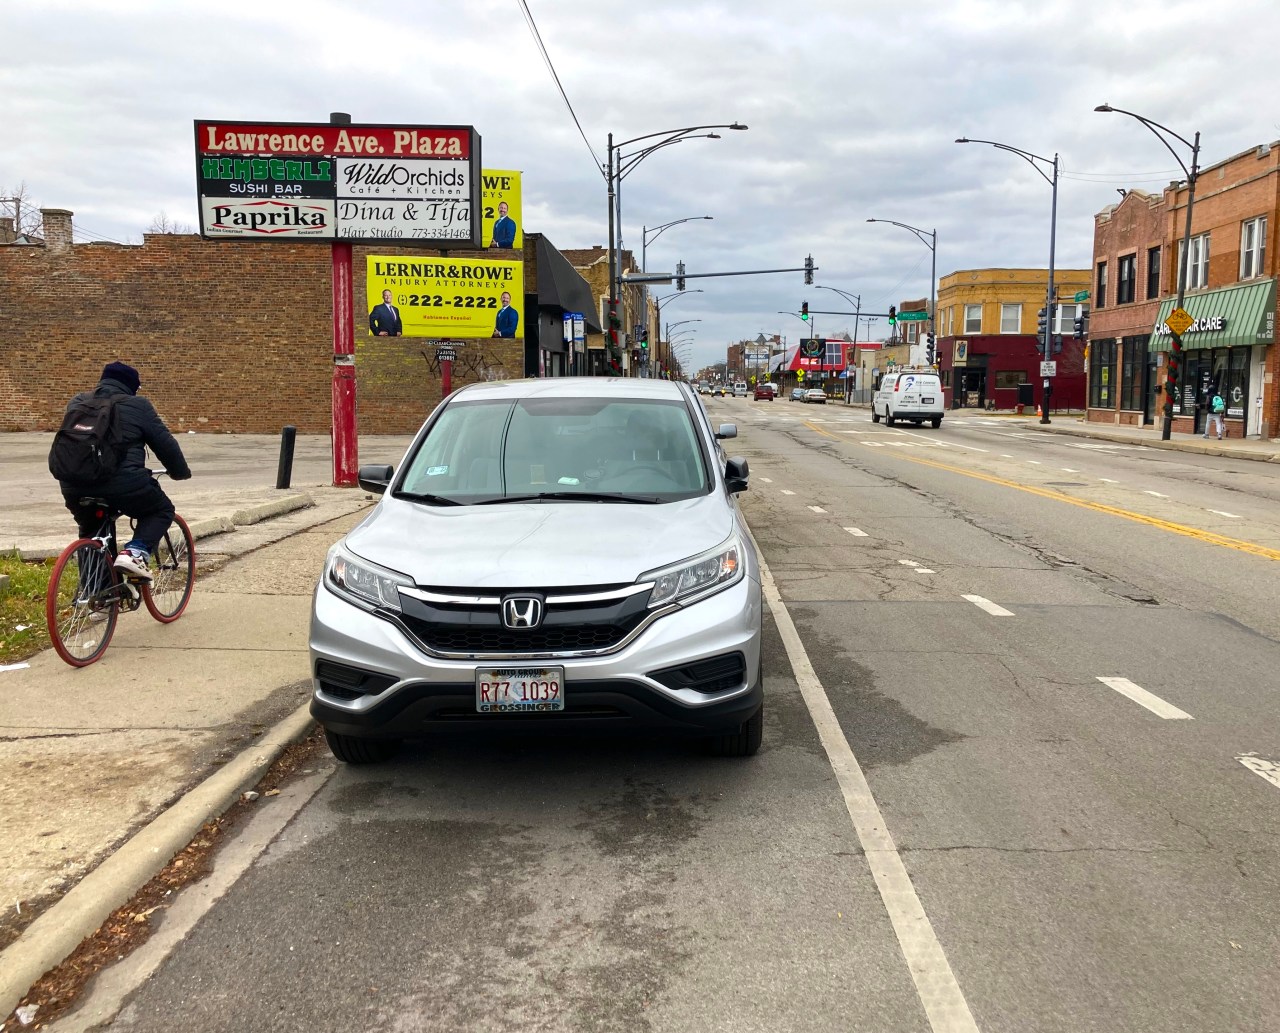 Current conditions on Lawrence Avenue near Rockwell Avenue. Rather than using the existing non-protected bike lanes, which offer no physical protection from drivers, this person opted to bike on the sidewalk. Photo: John Greenfield